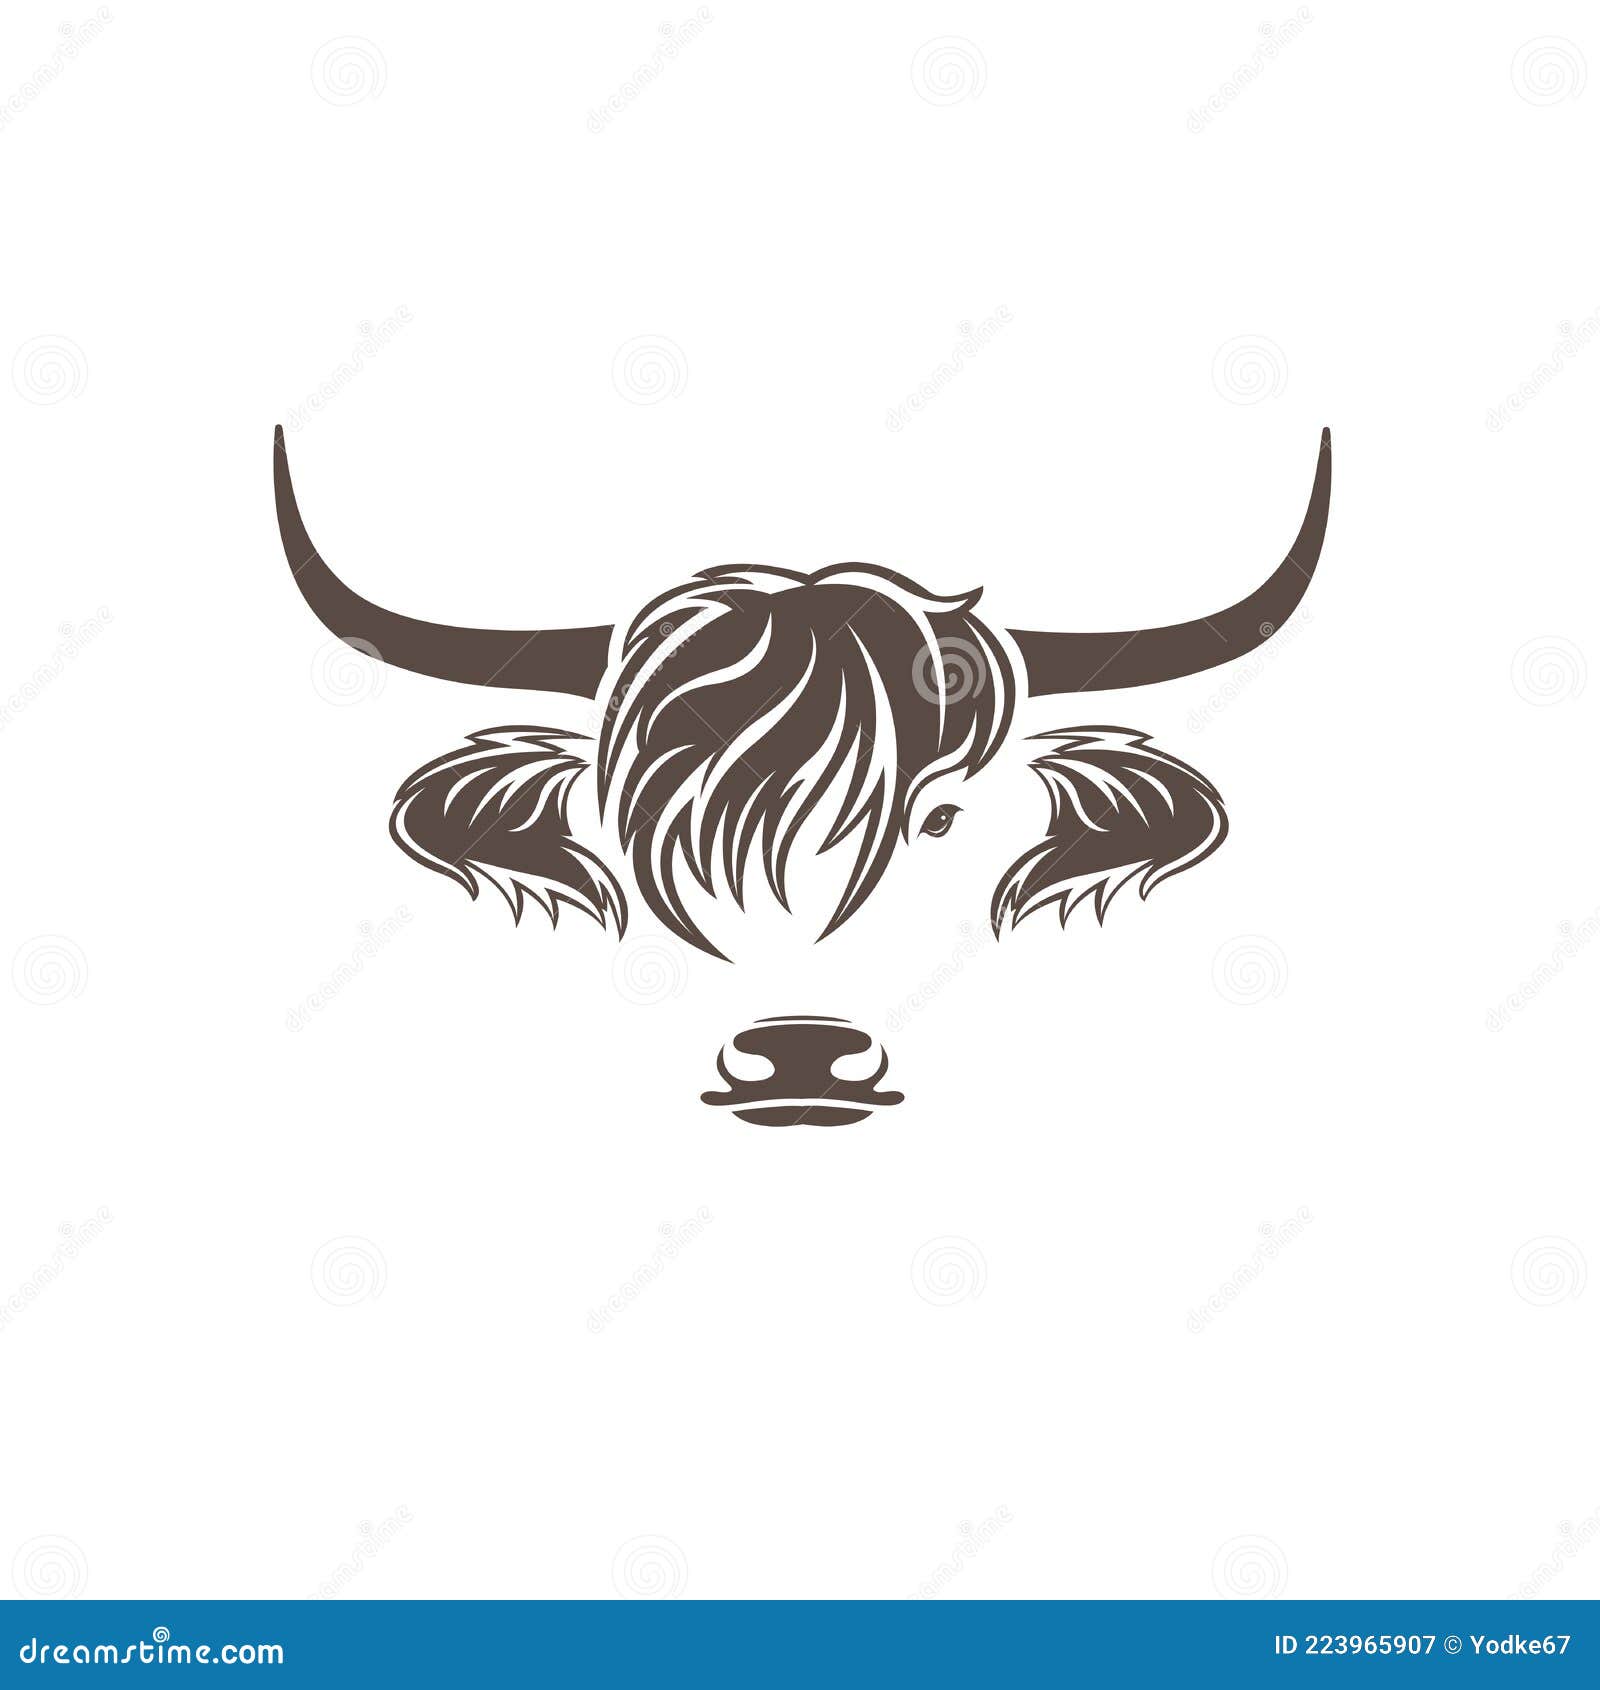 Highland Cow Tattoo Stock Illustrations – 34 Highland Cow Tattoo Stock Illustrations, Vectors & Clipart - Dreamstime